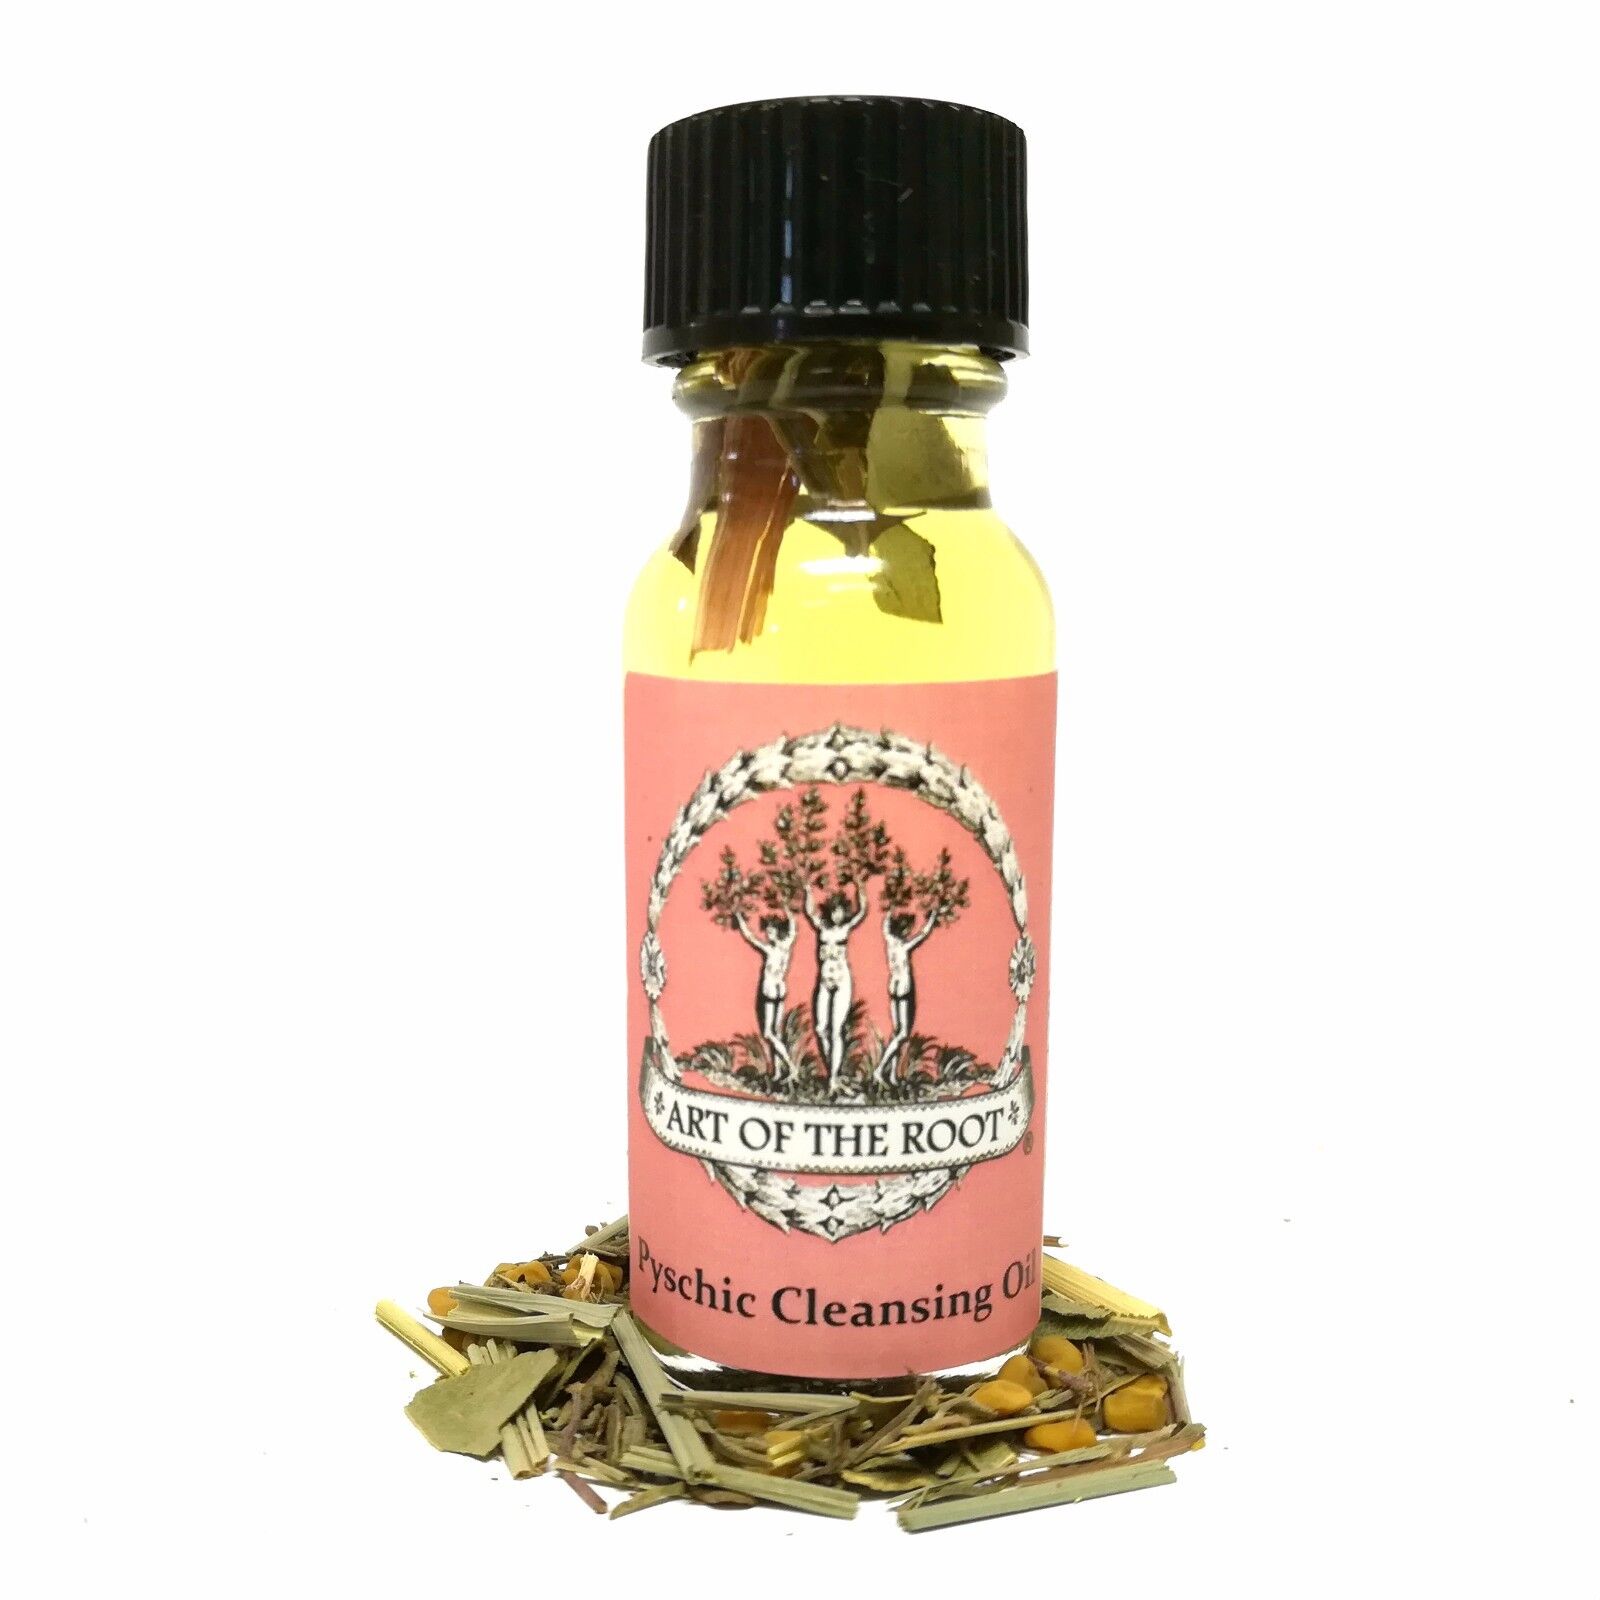 Psychic Cleansing Oil Purification Clarity Negativity  Hoodoo Voodoo Wicca Pagan